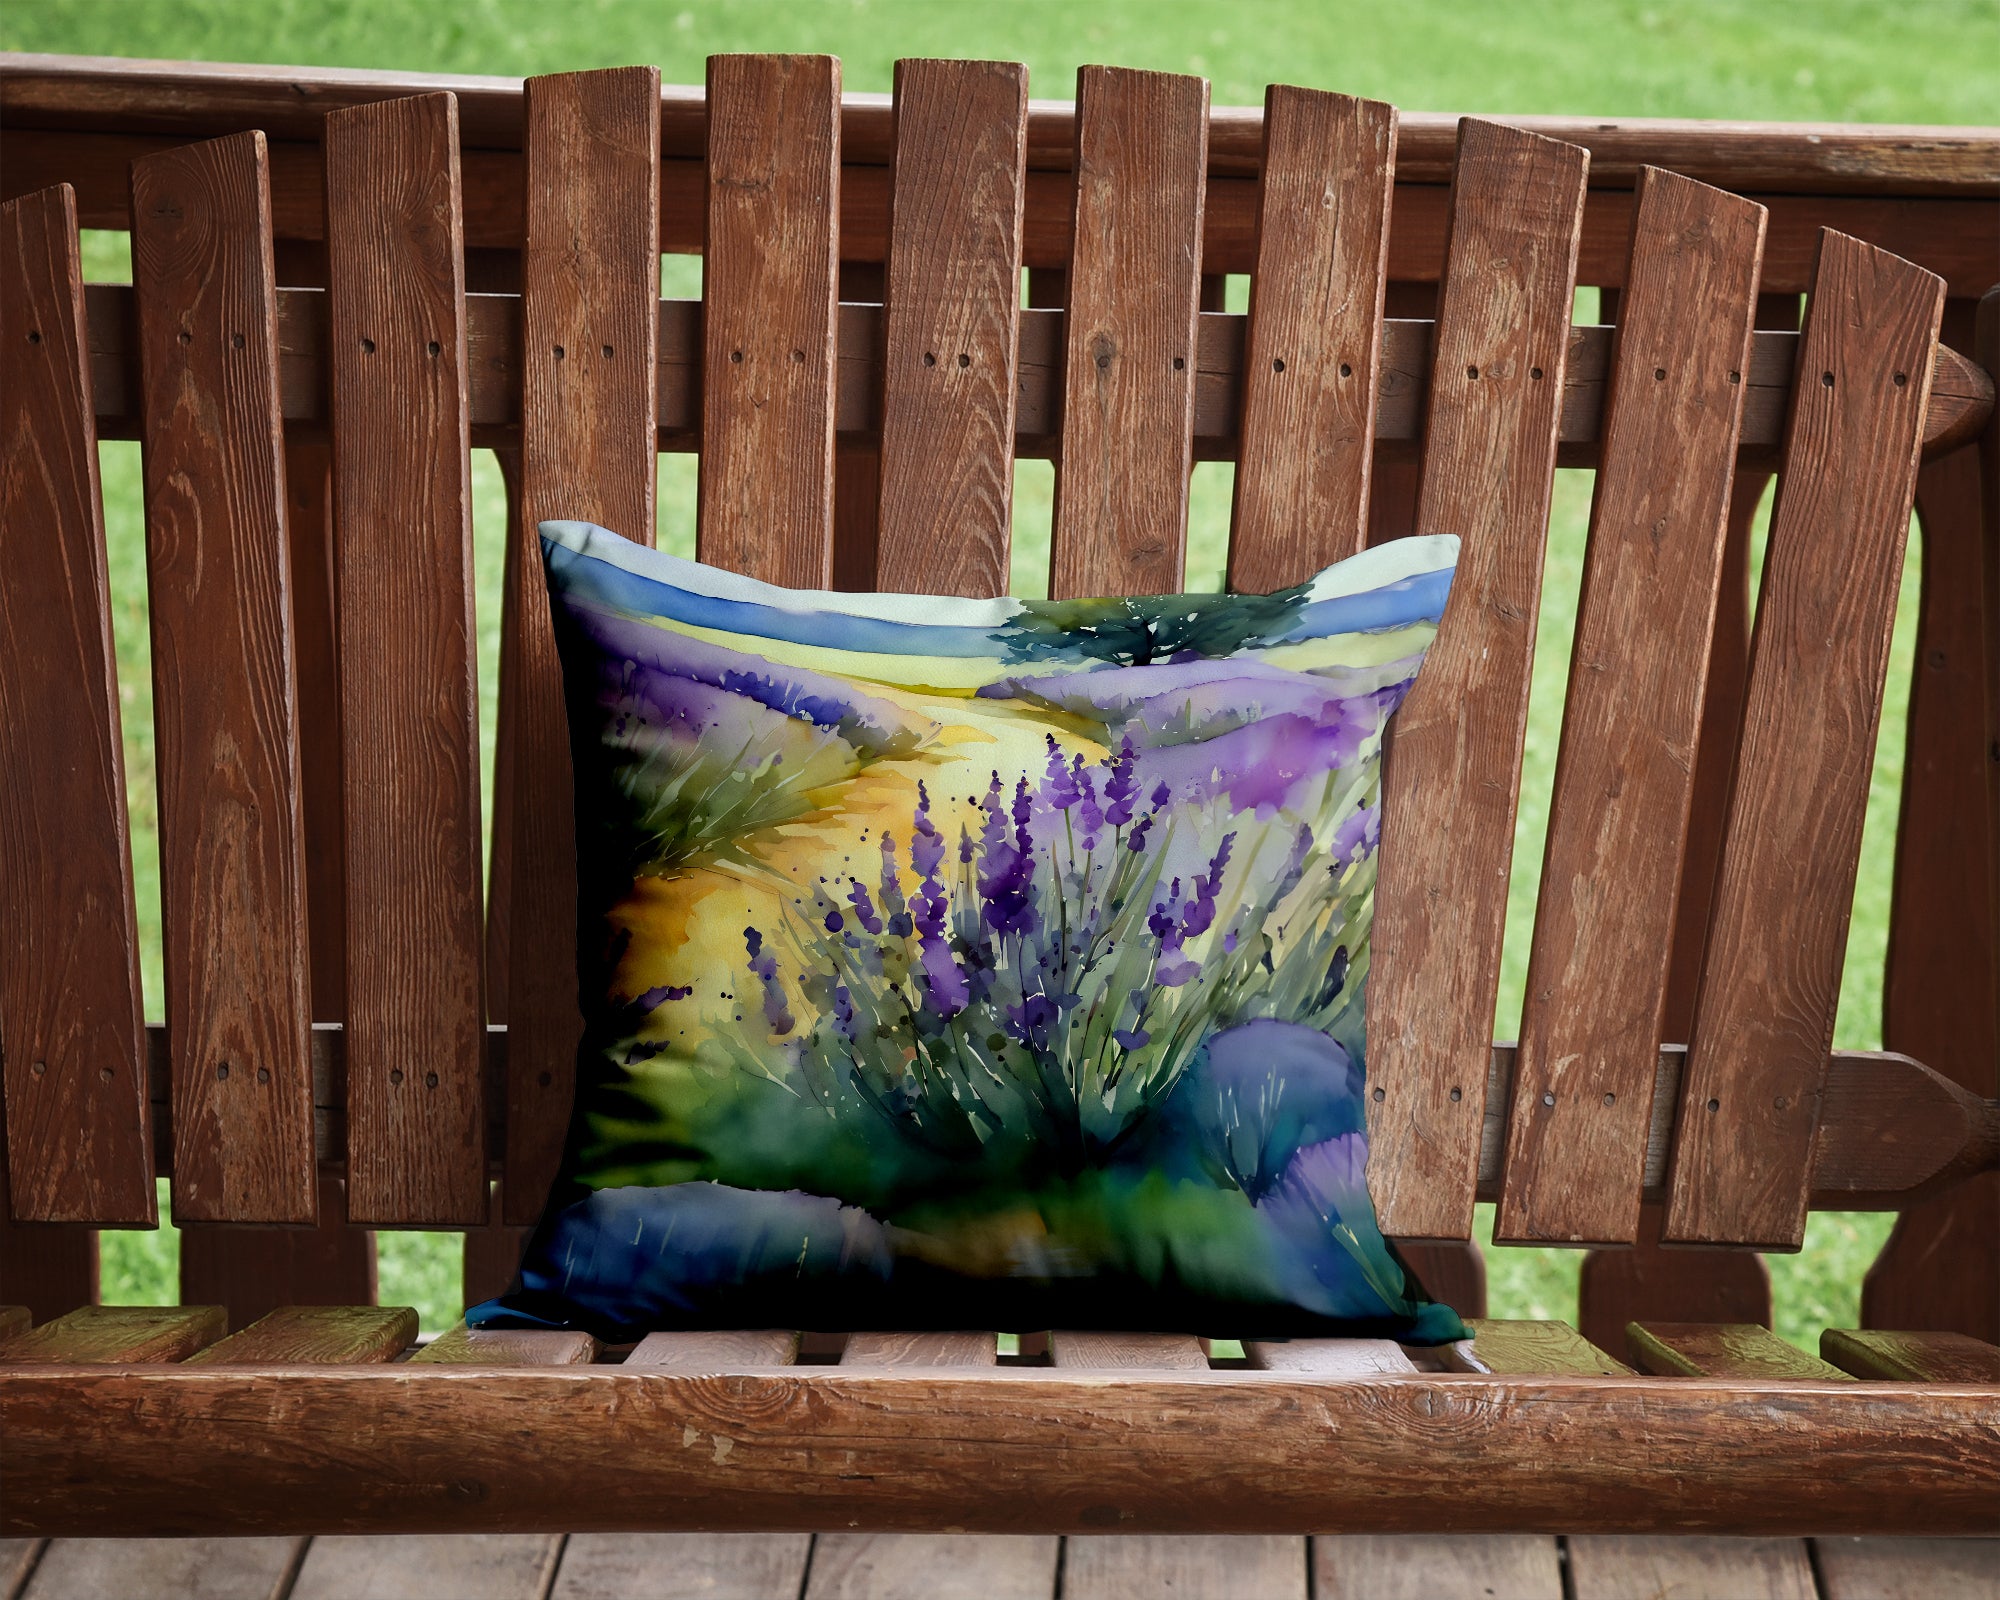 Buy this Lavender in Watercolor Throw Pillow